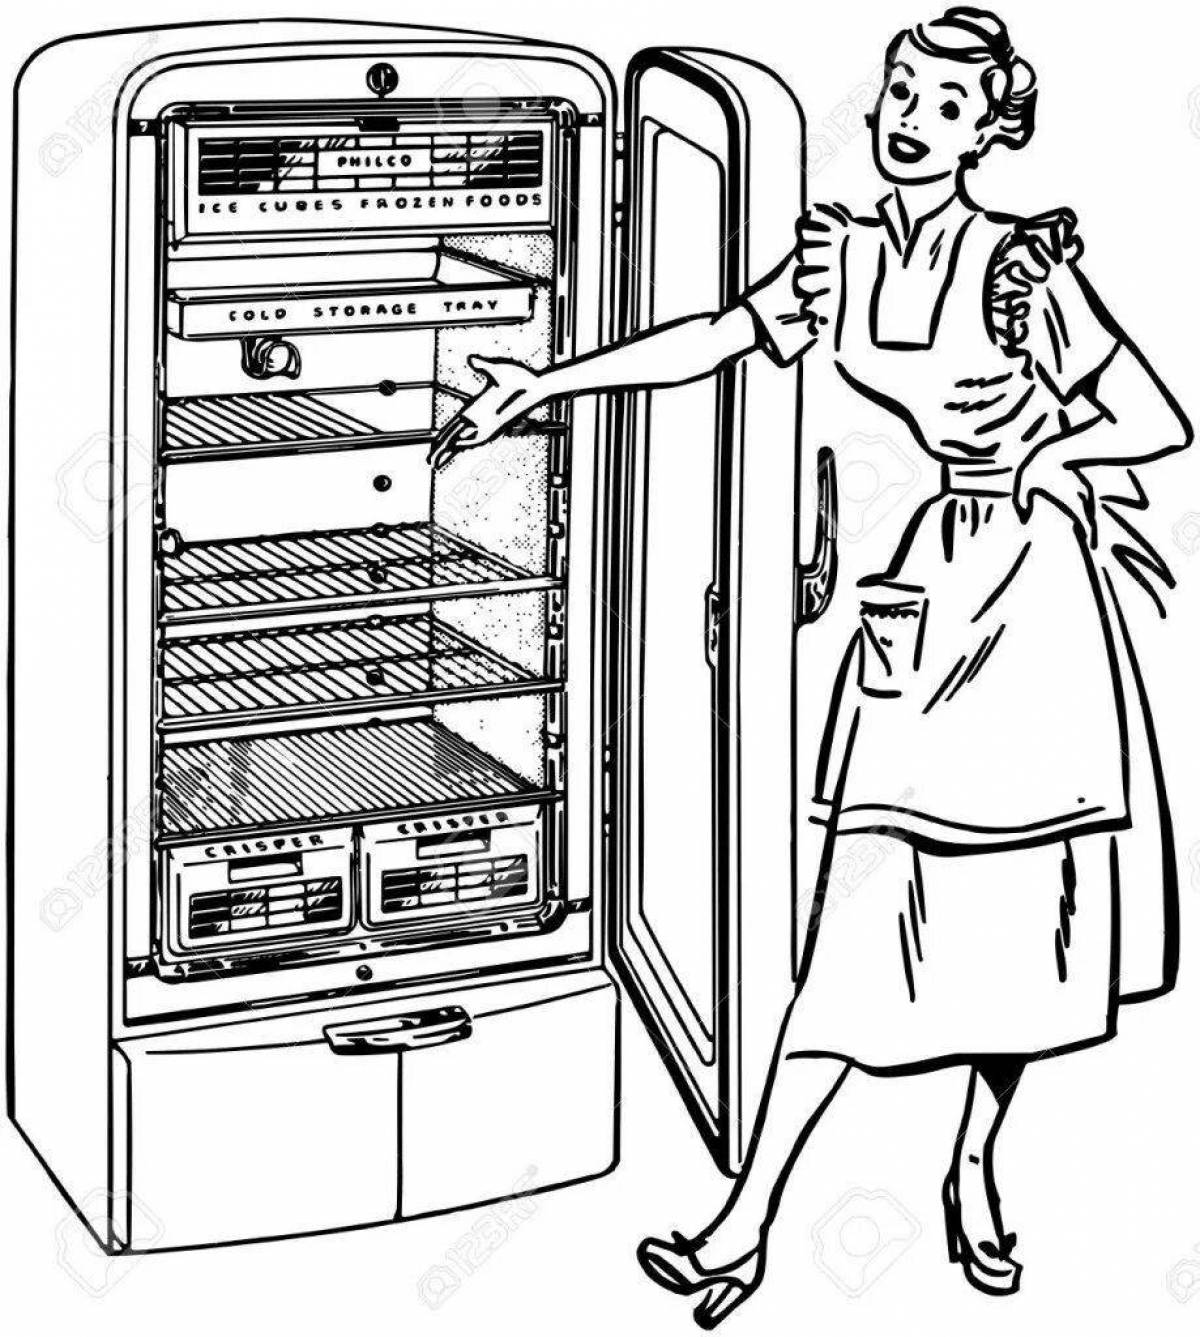 Coloring page of a charming empty refrigerator